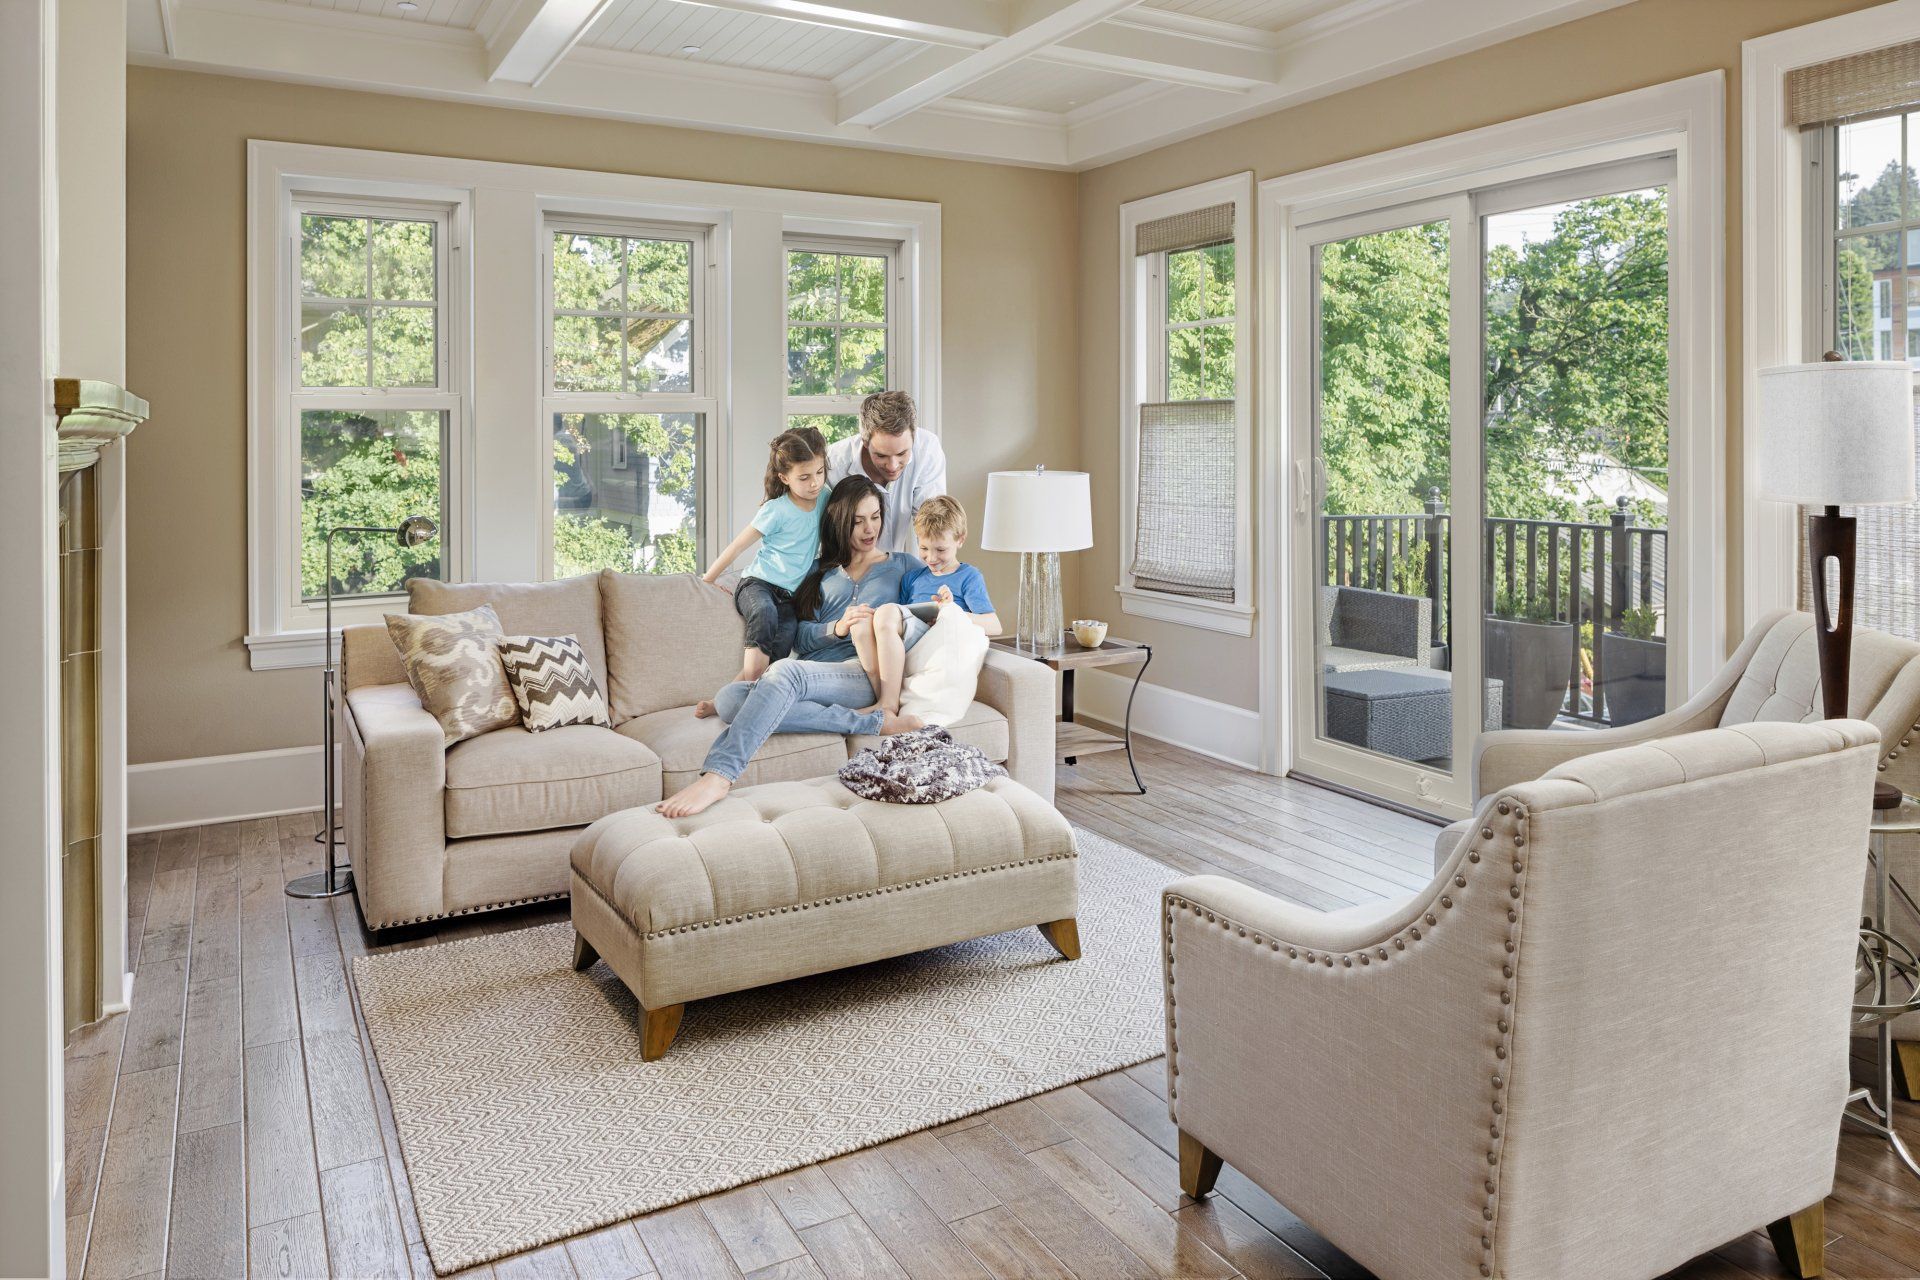 Living Room with family and patio doors